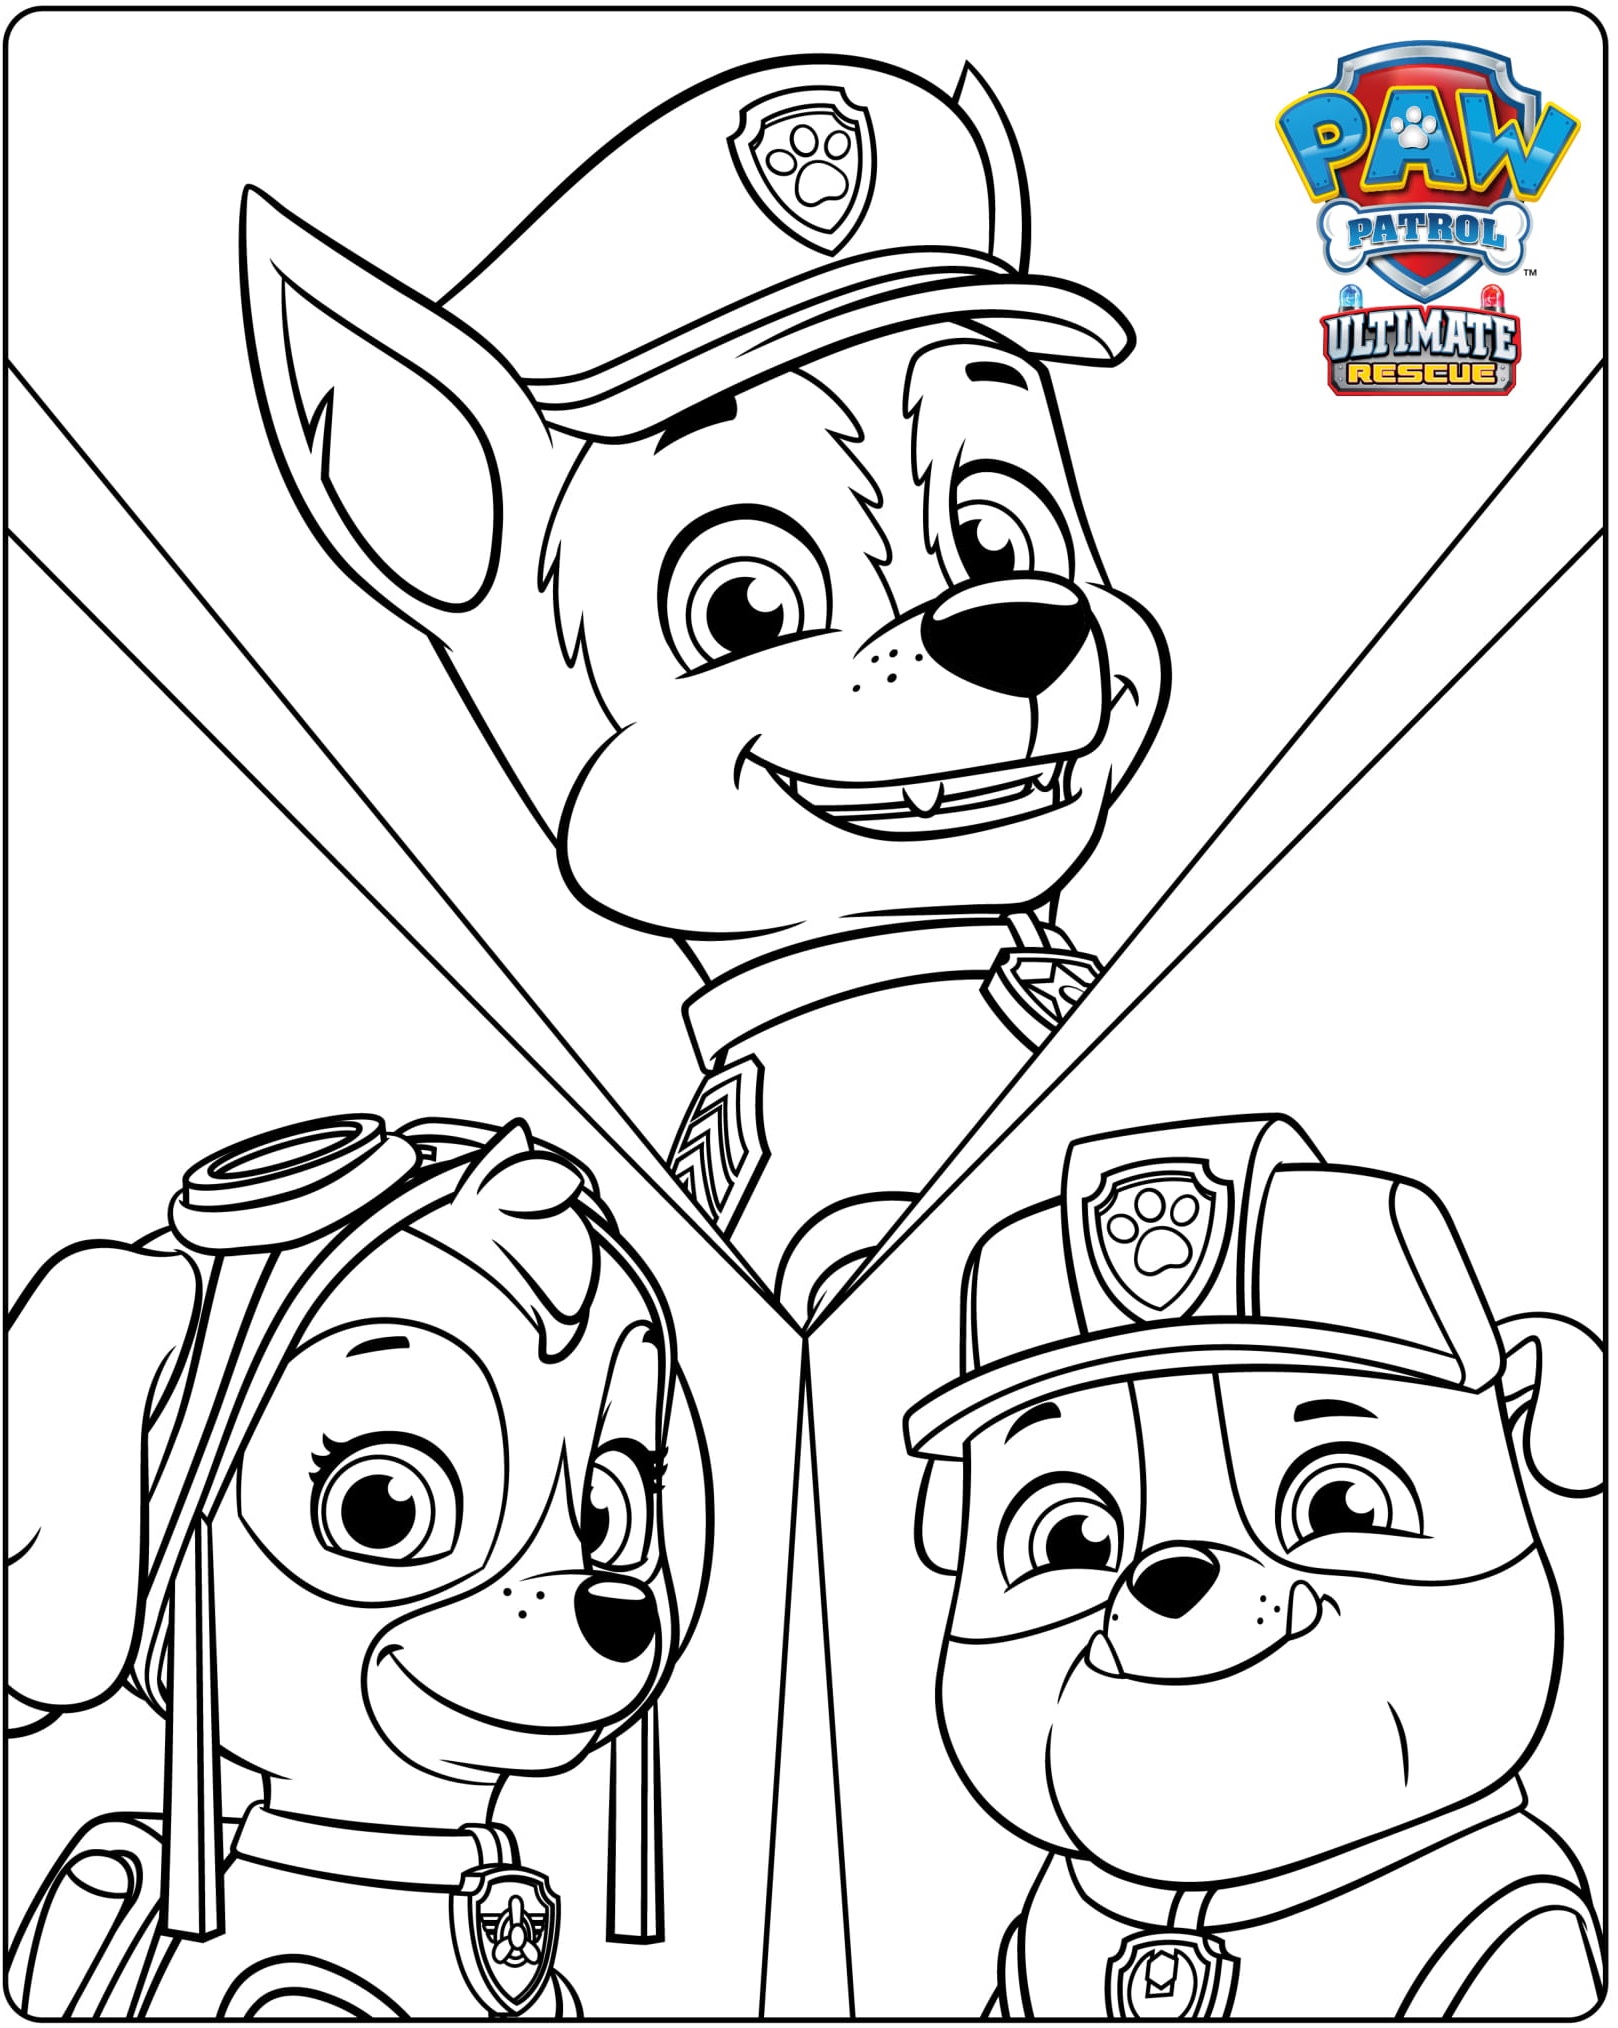 Paw Patrol Ultimate Rescue Chase Skye Rubble